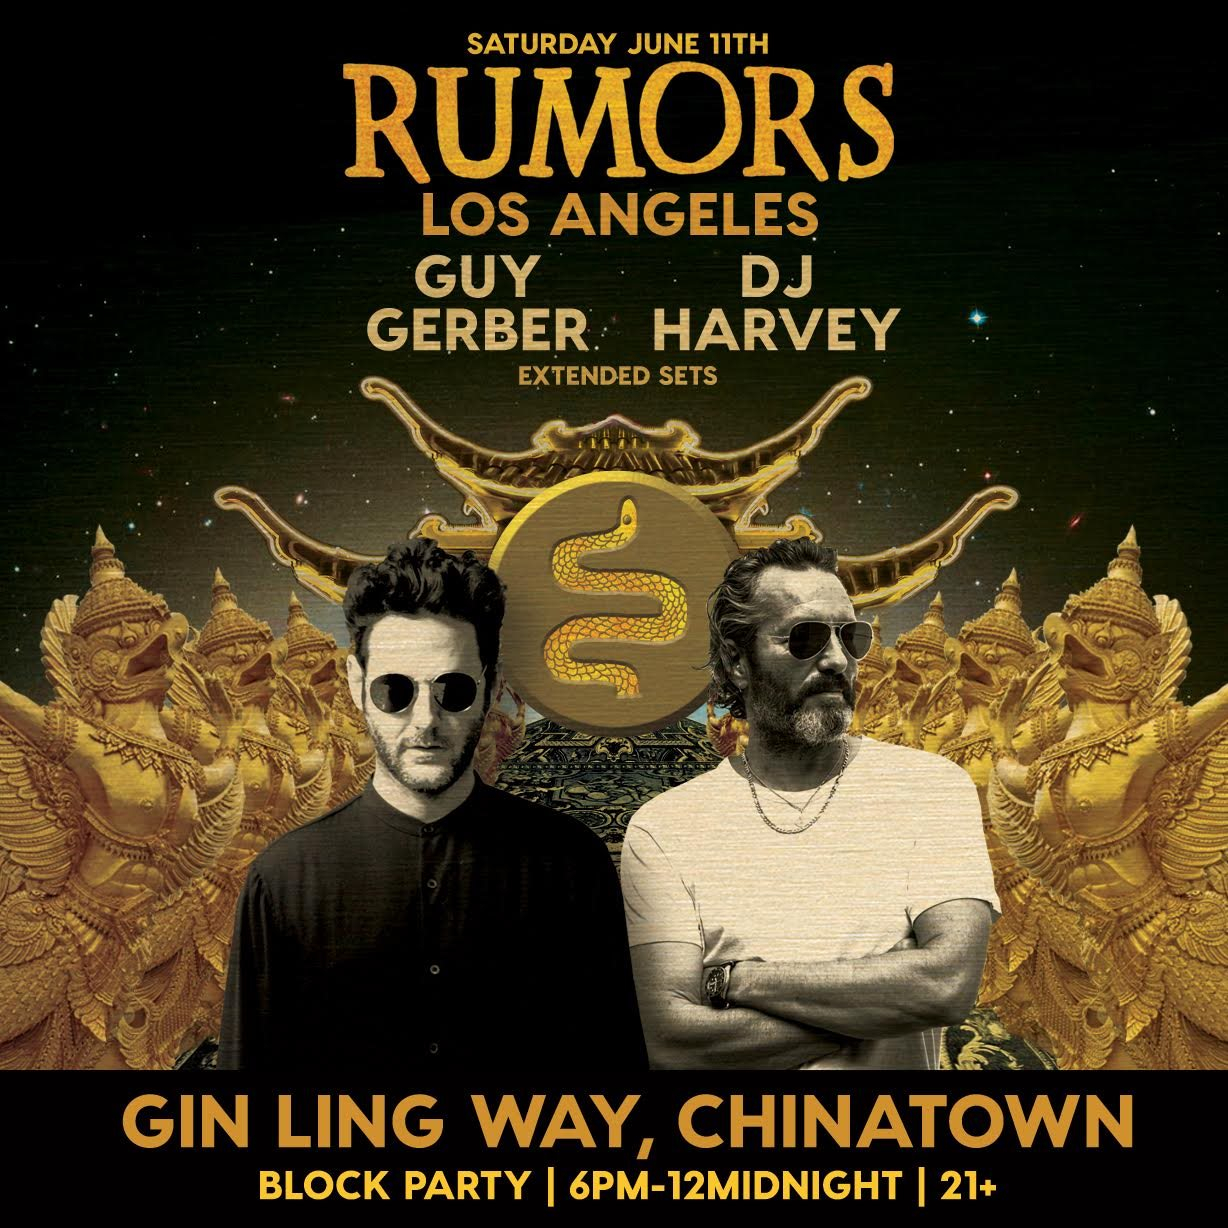 Rumors Chinatown Block Party with Guy Gerber // DJ Harvey - Flyer front